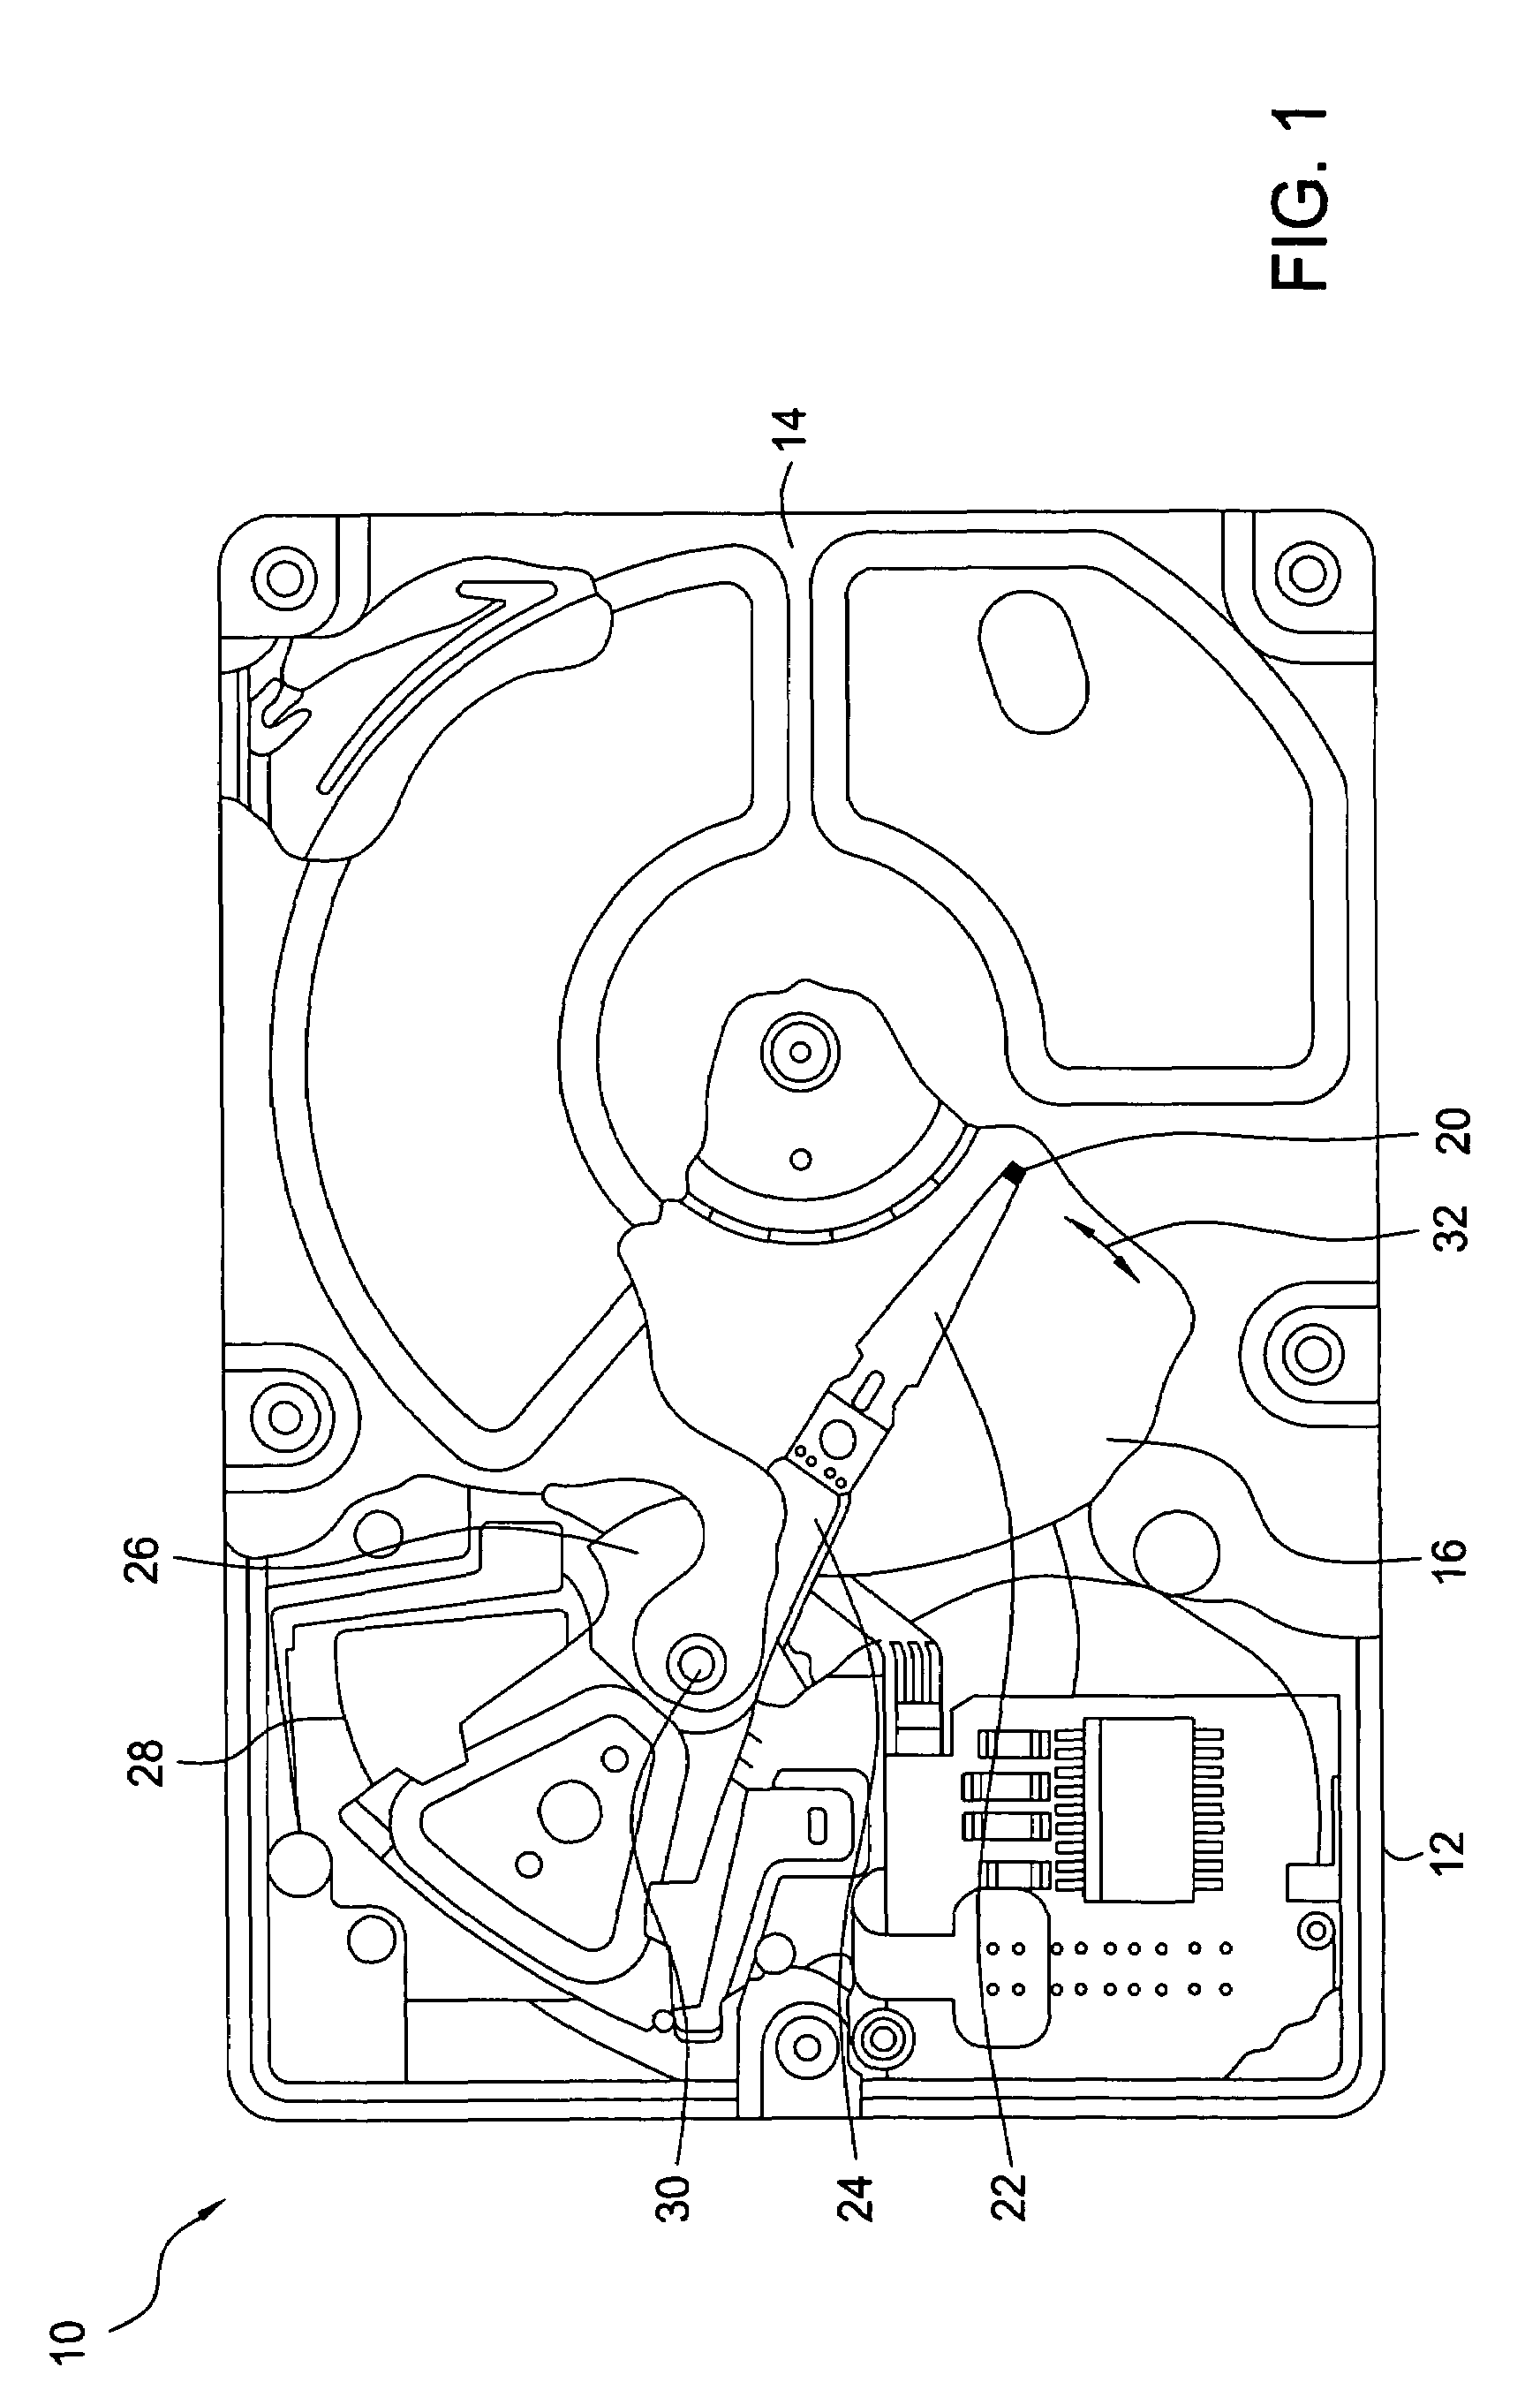 Capillary seal with flow restrictors